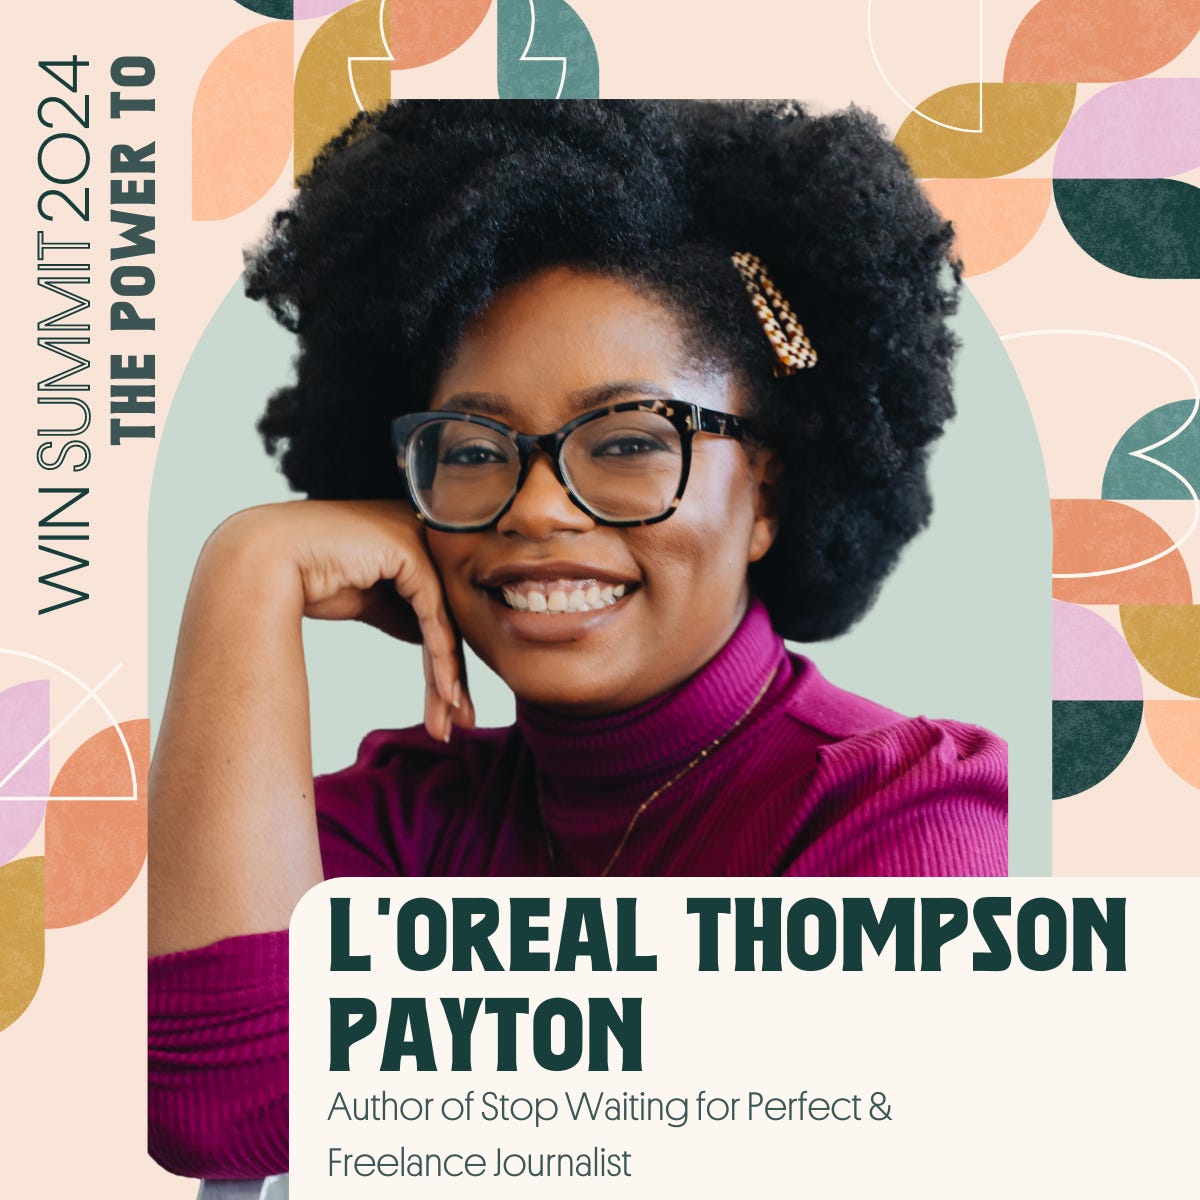 Infographic promoting an upcoming summit with author L'Oreal Thompson Payton